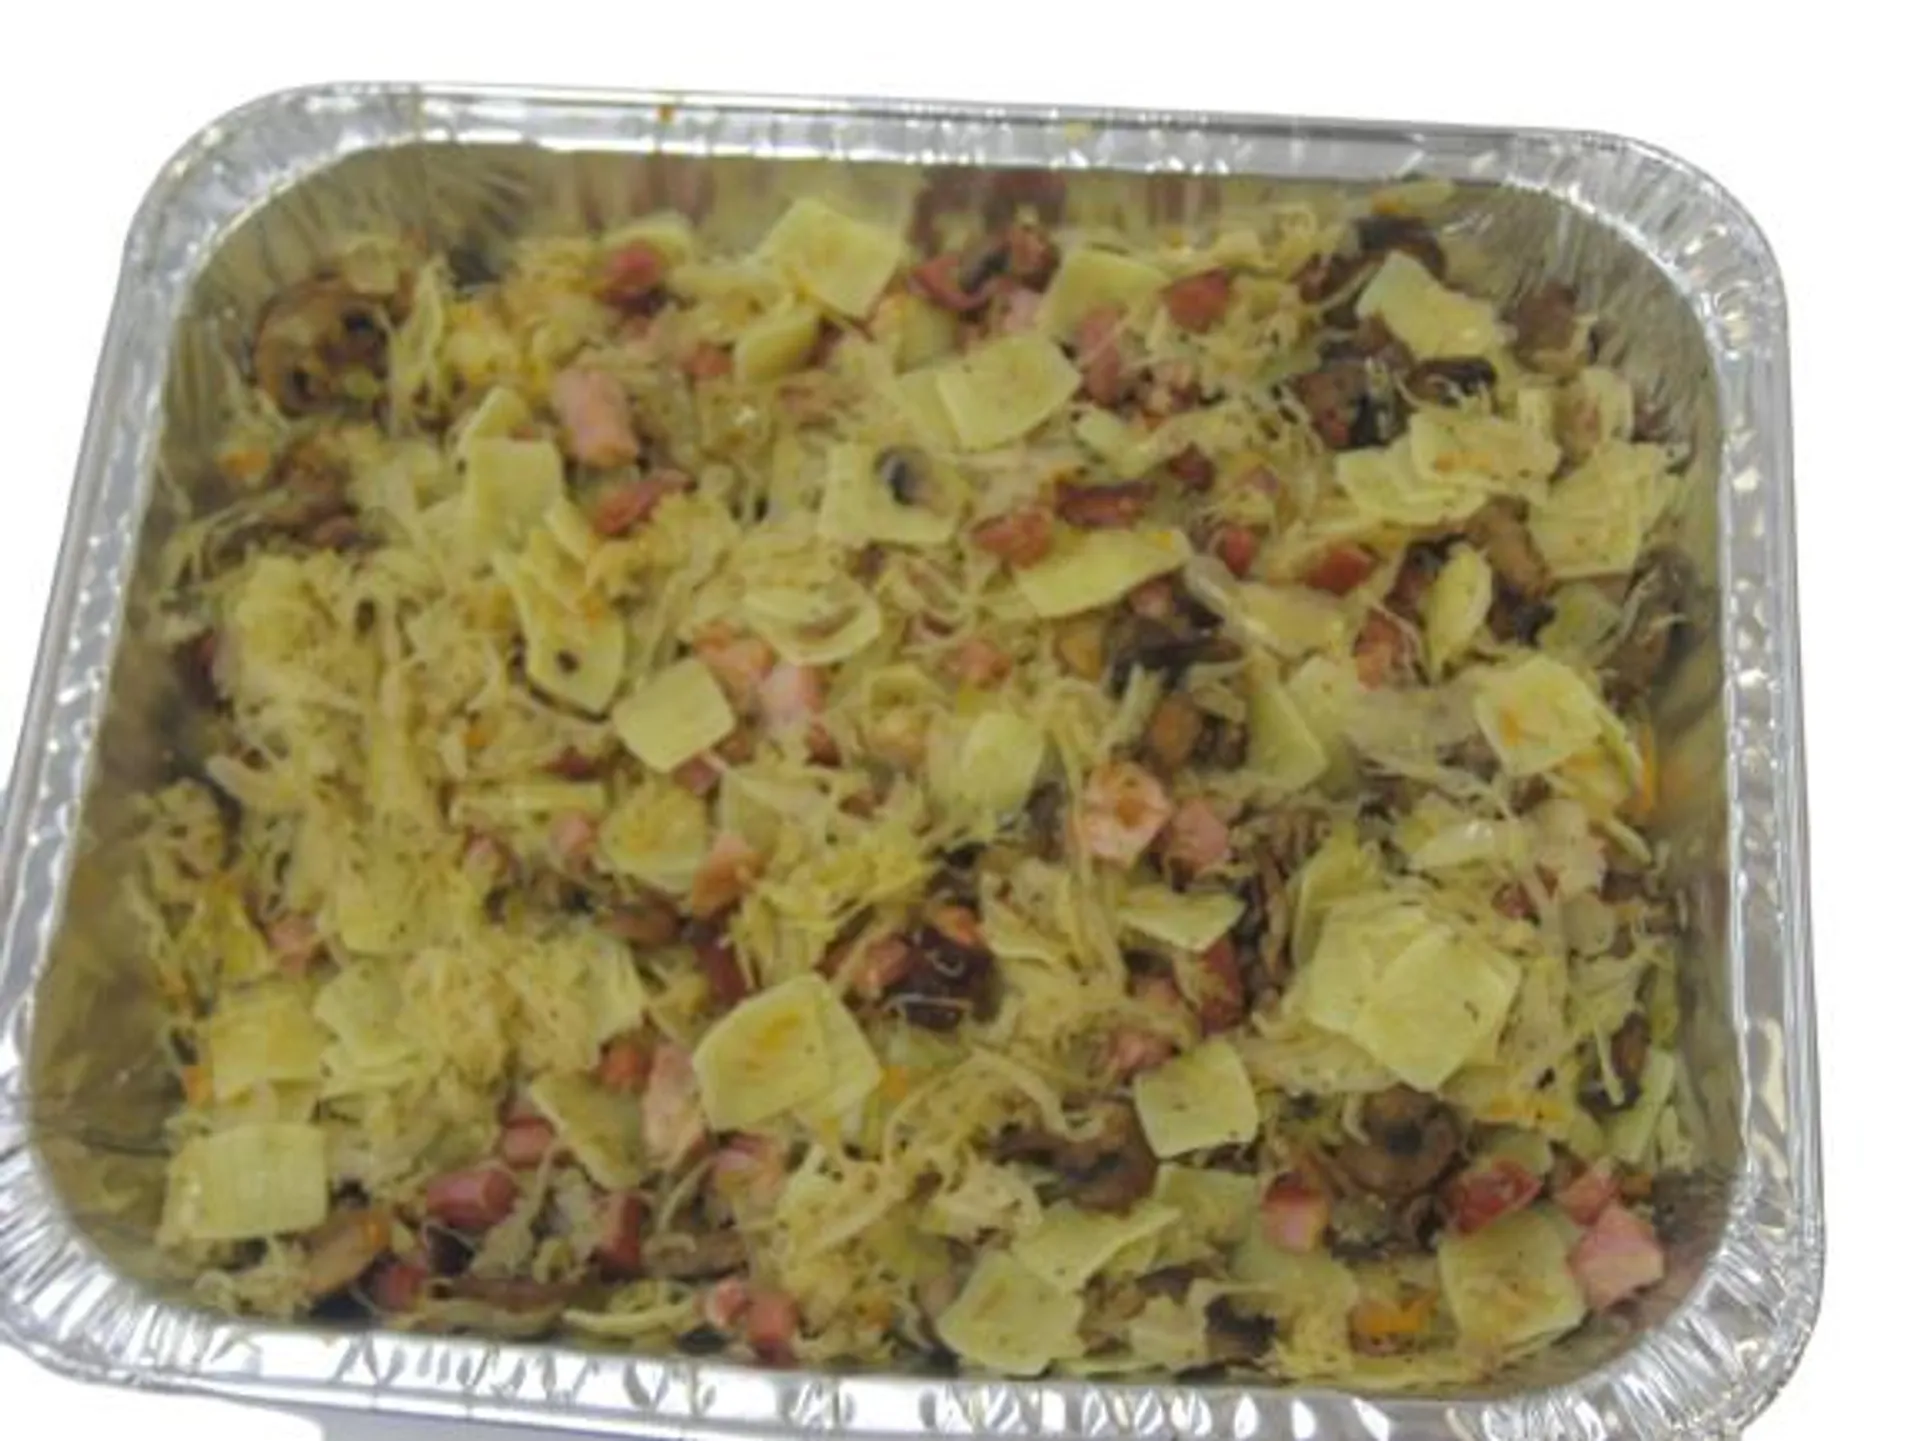 Lazanki - Noodles with Cabbage and Sausage